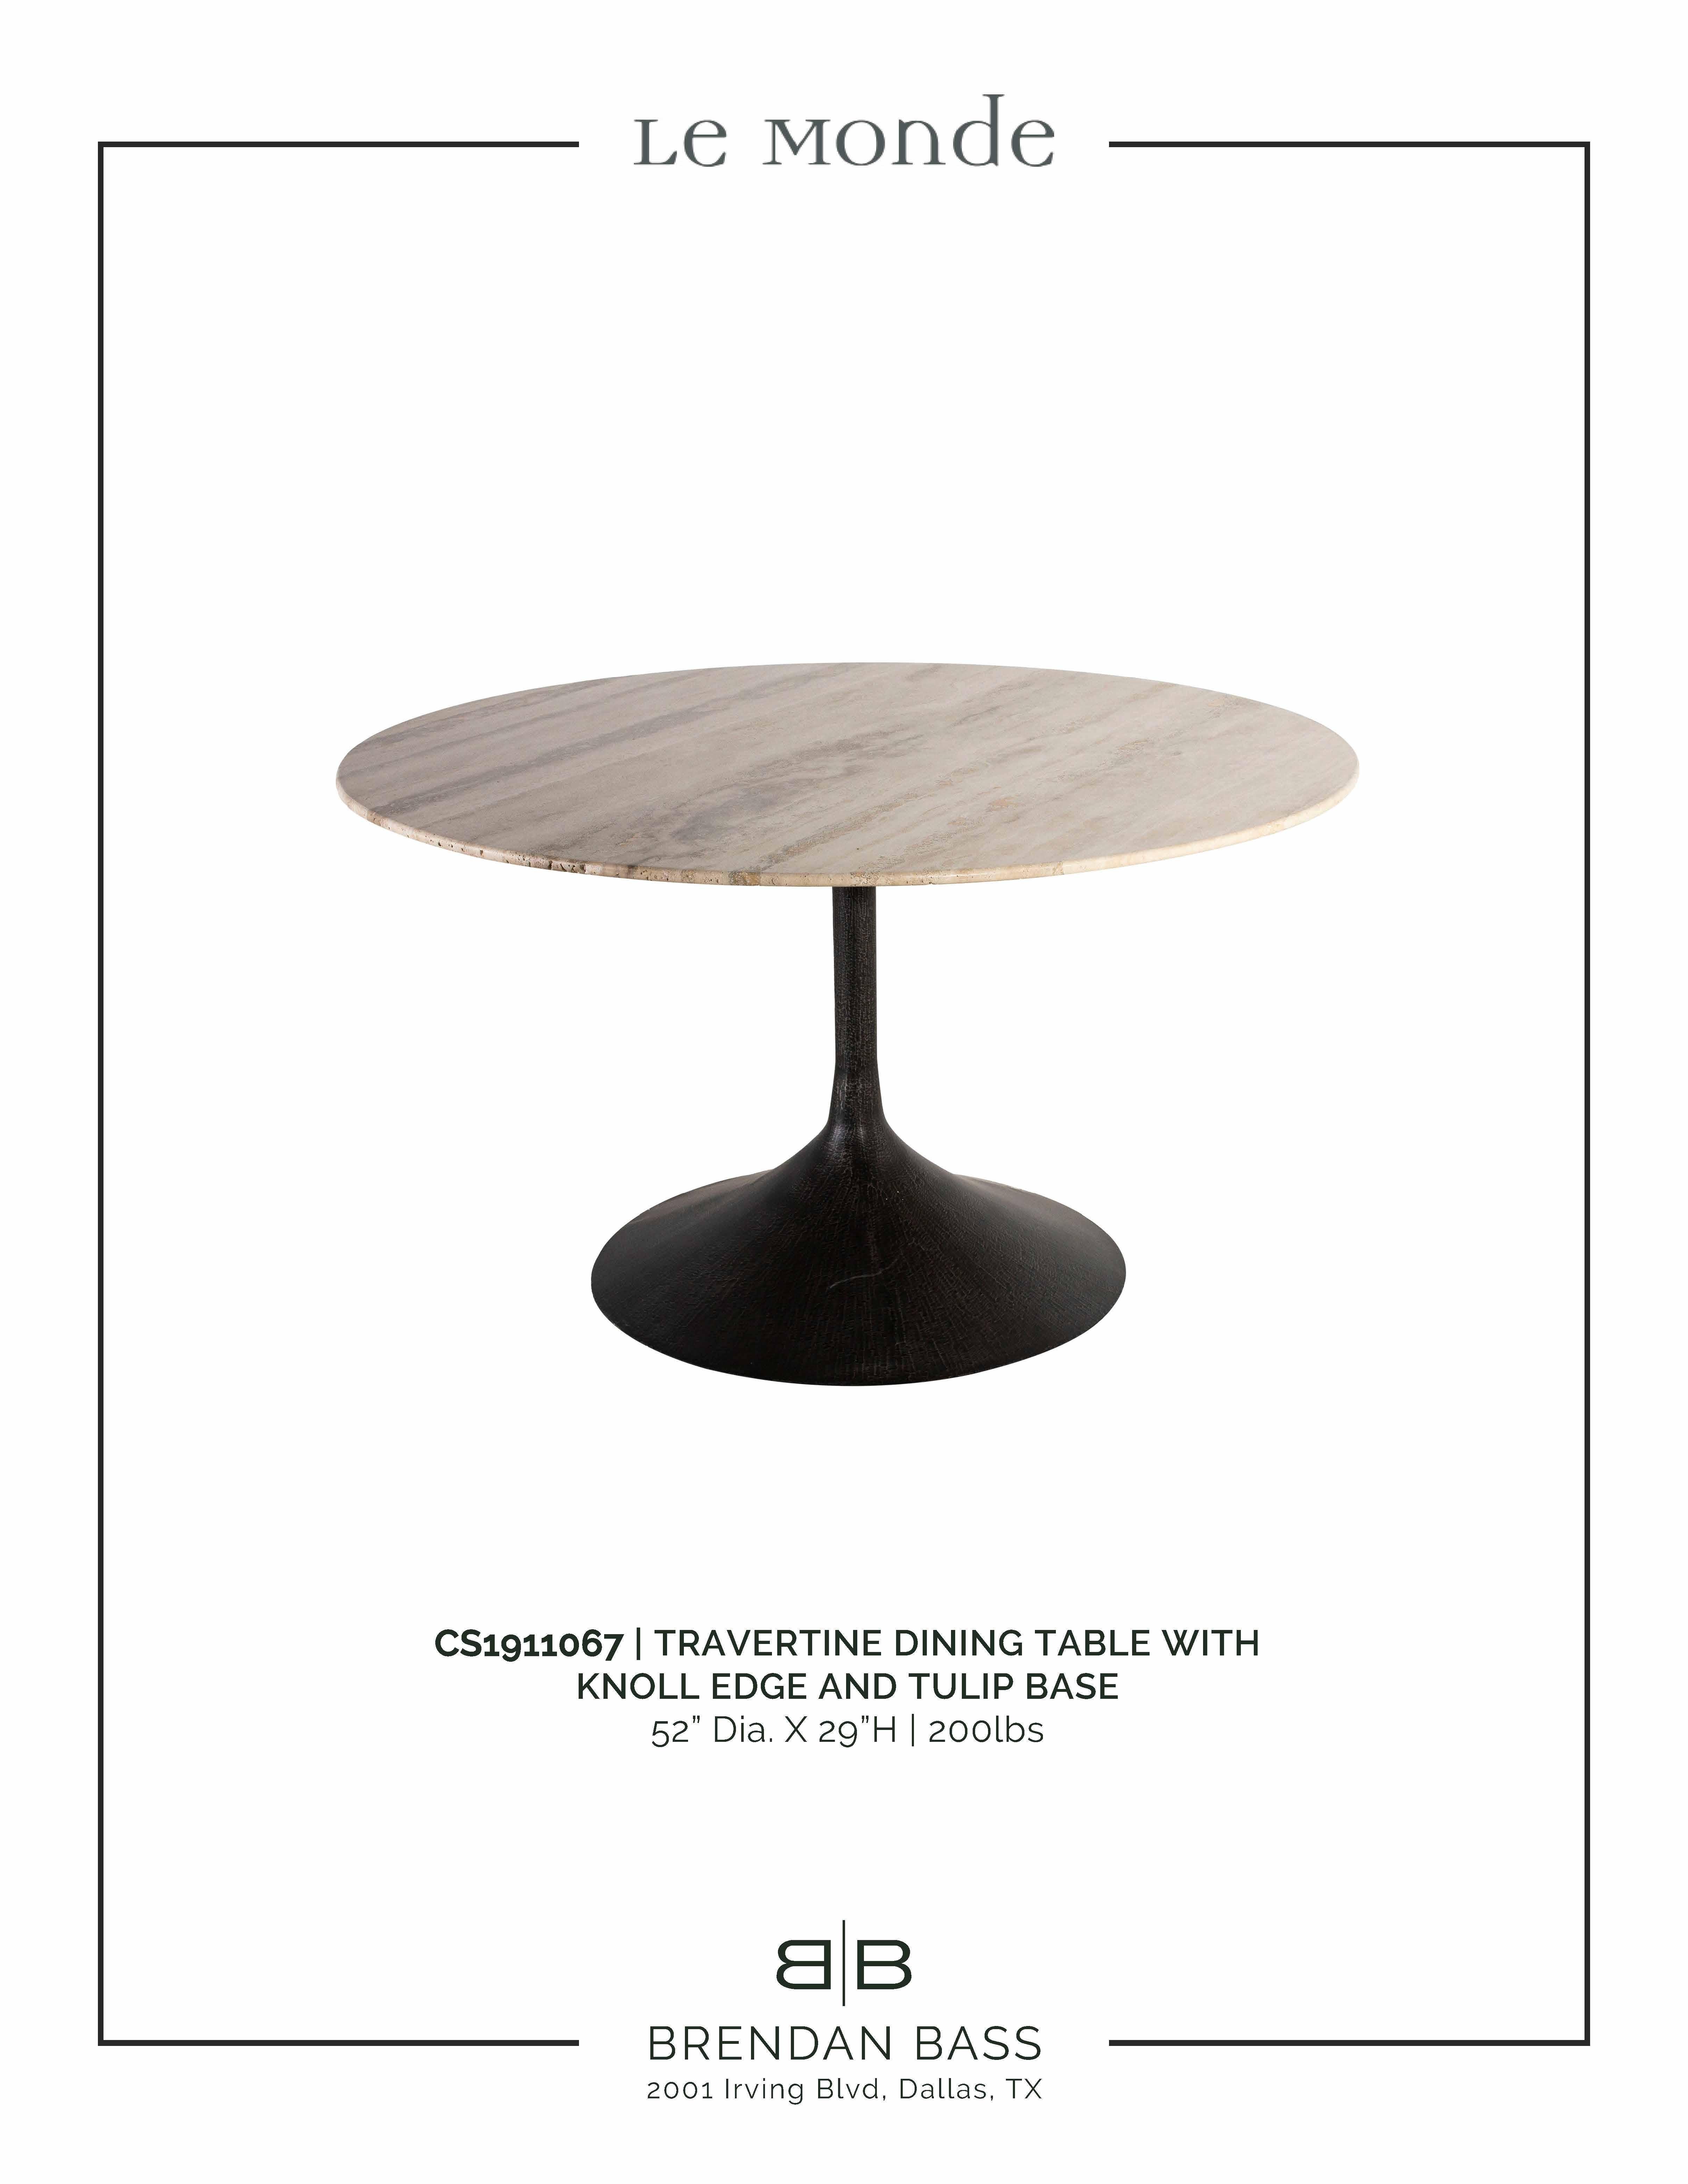 Steel Travertine Dining Table with Knoll Edge and Tulip Base